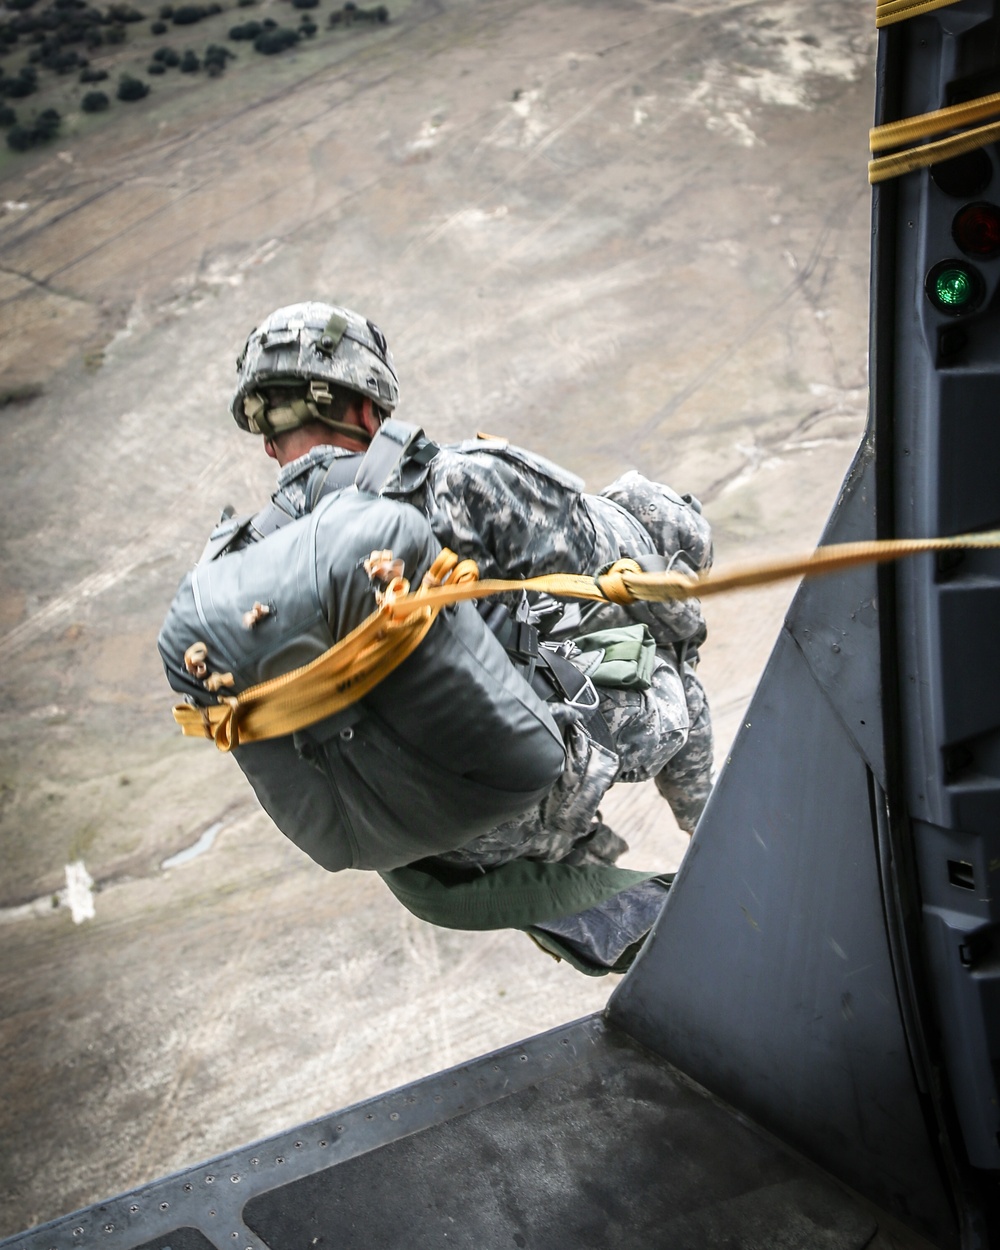 Texas Soldiers jump into Fort Hood